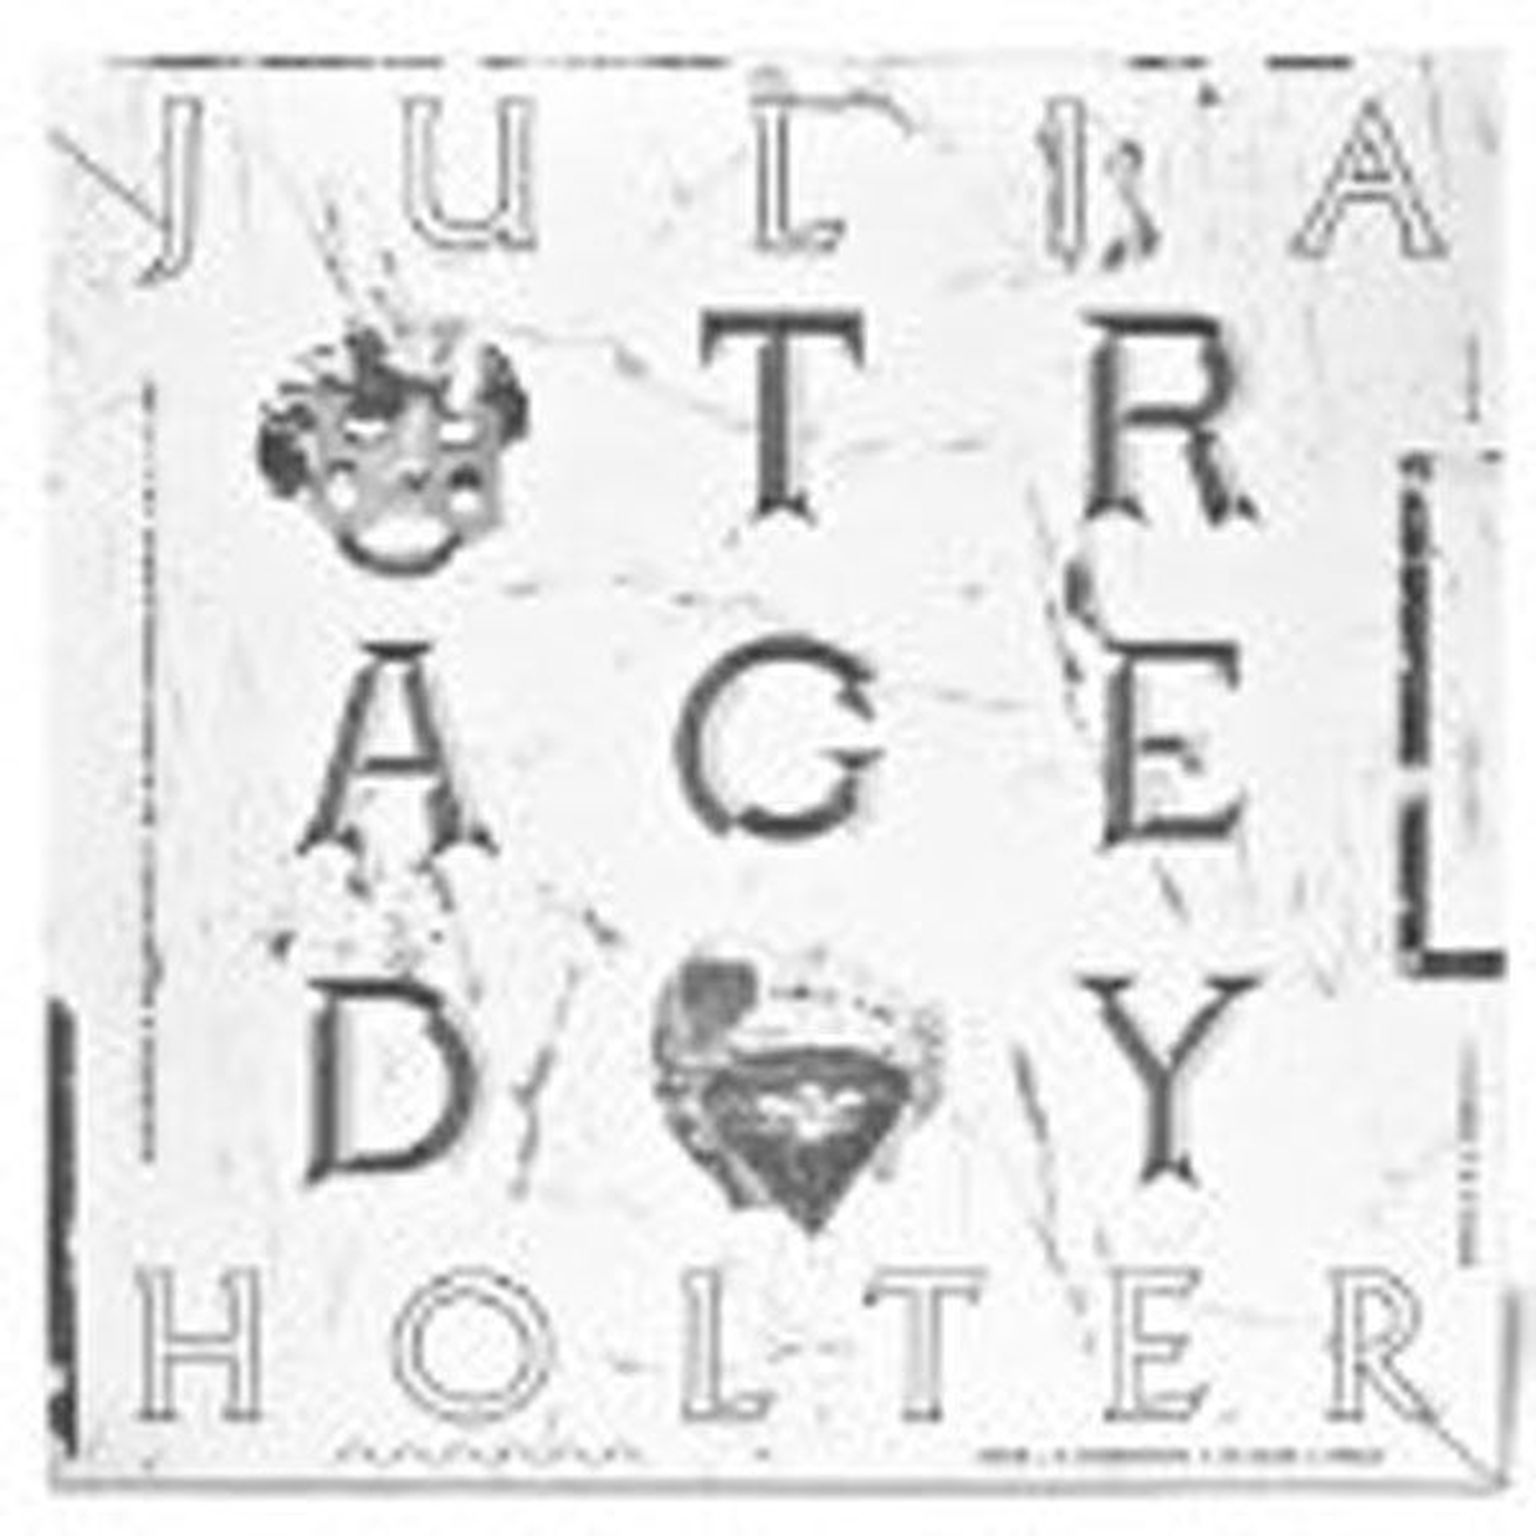 Julia Holter
Tragedy 
(Leaving)